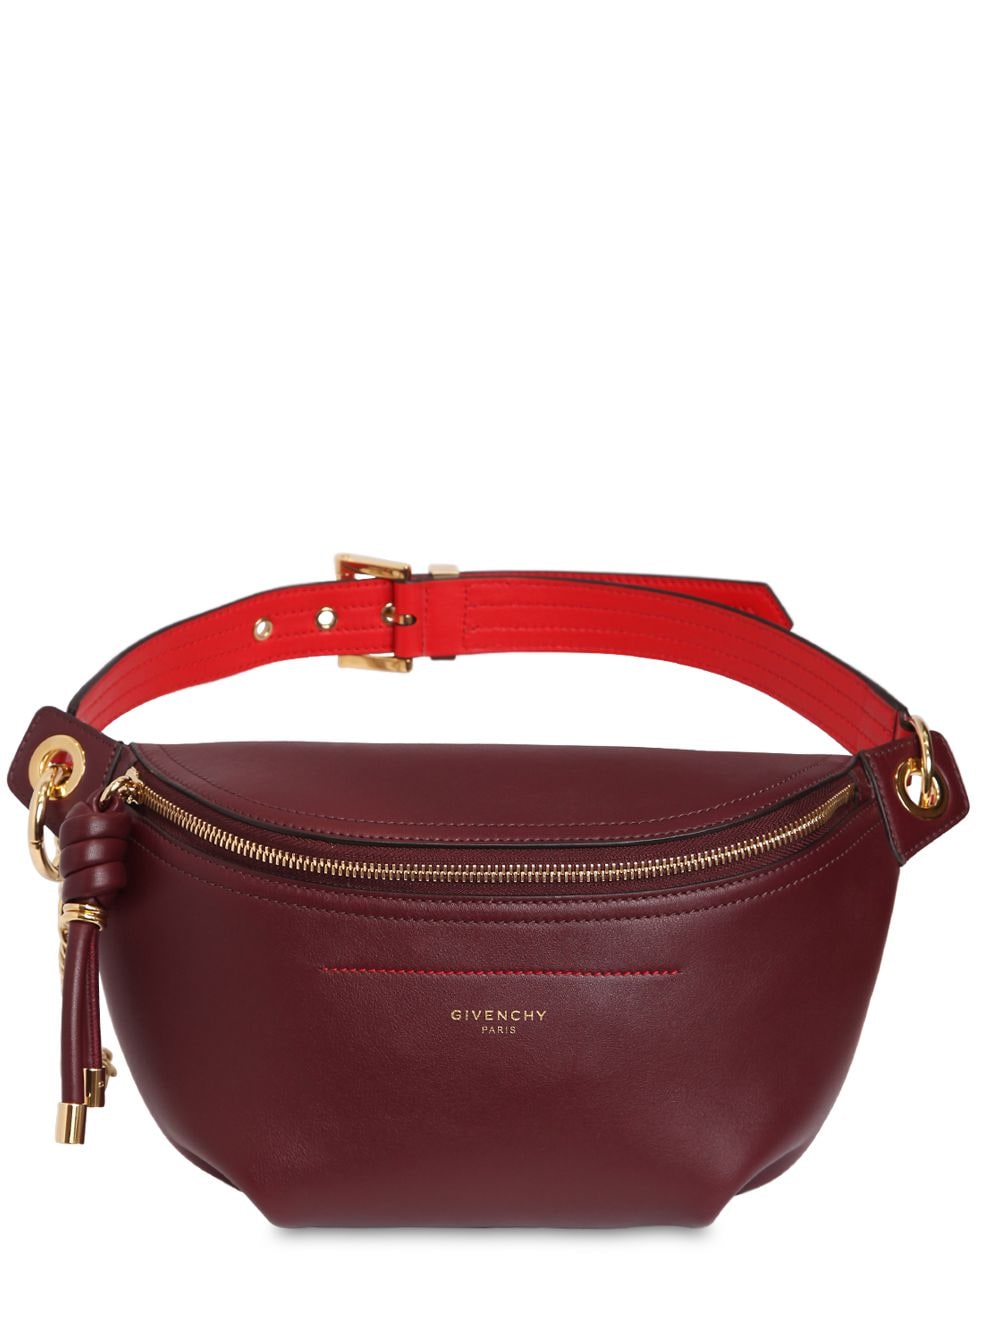 GIVENCHY MEDIUM WHIP SMOOTH LEATHER BELT BAG,70IA5P006-NTQY0